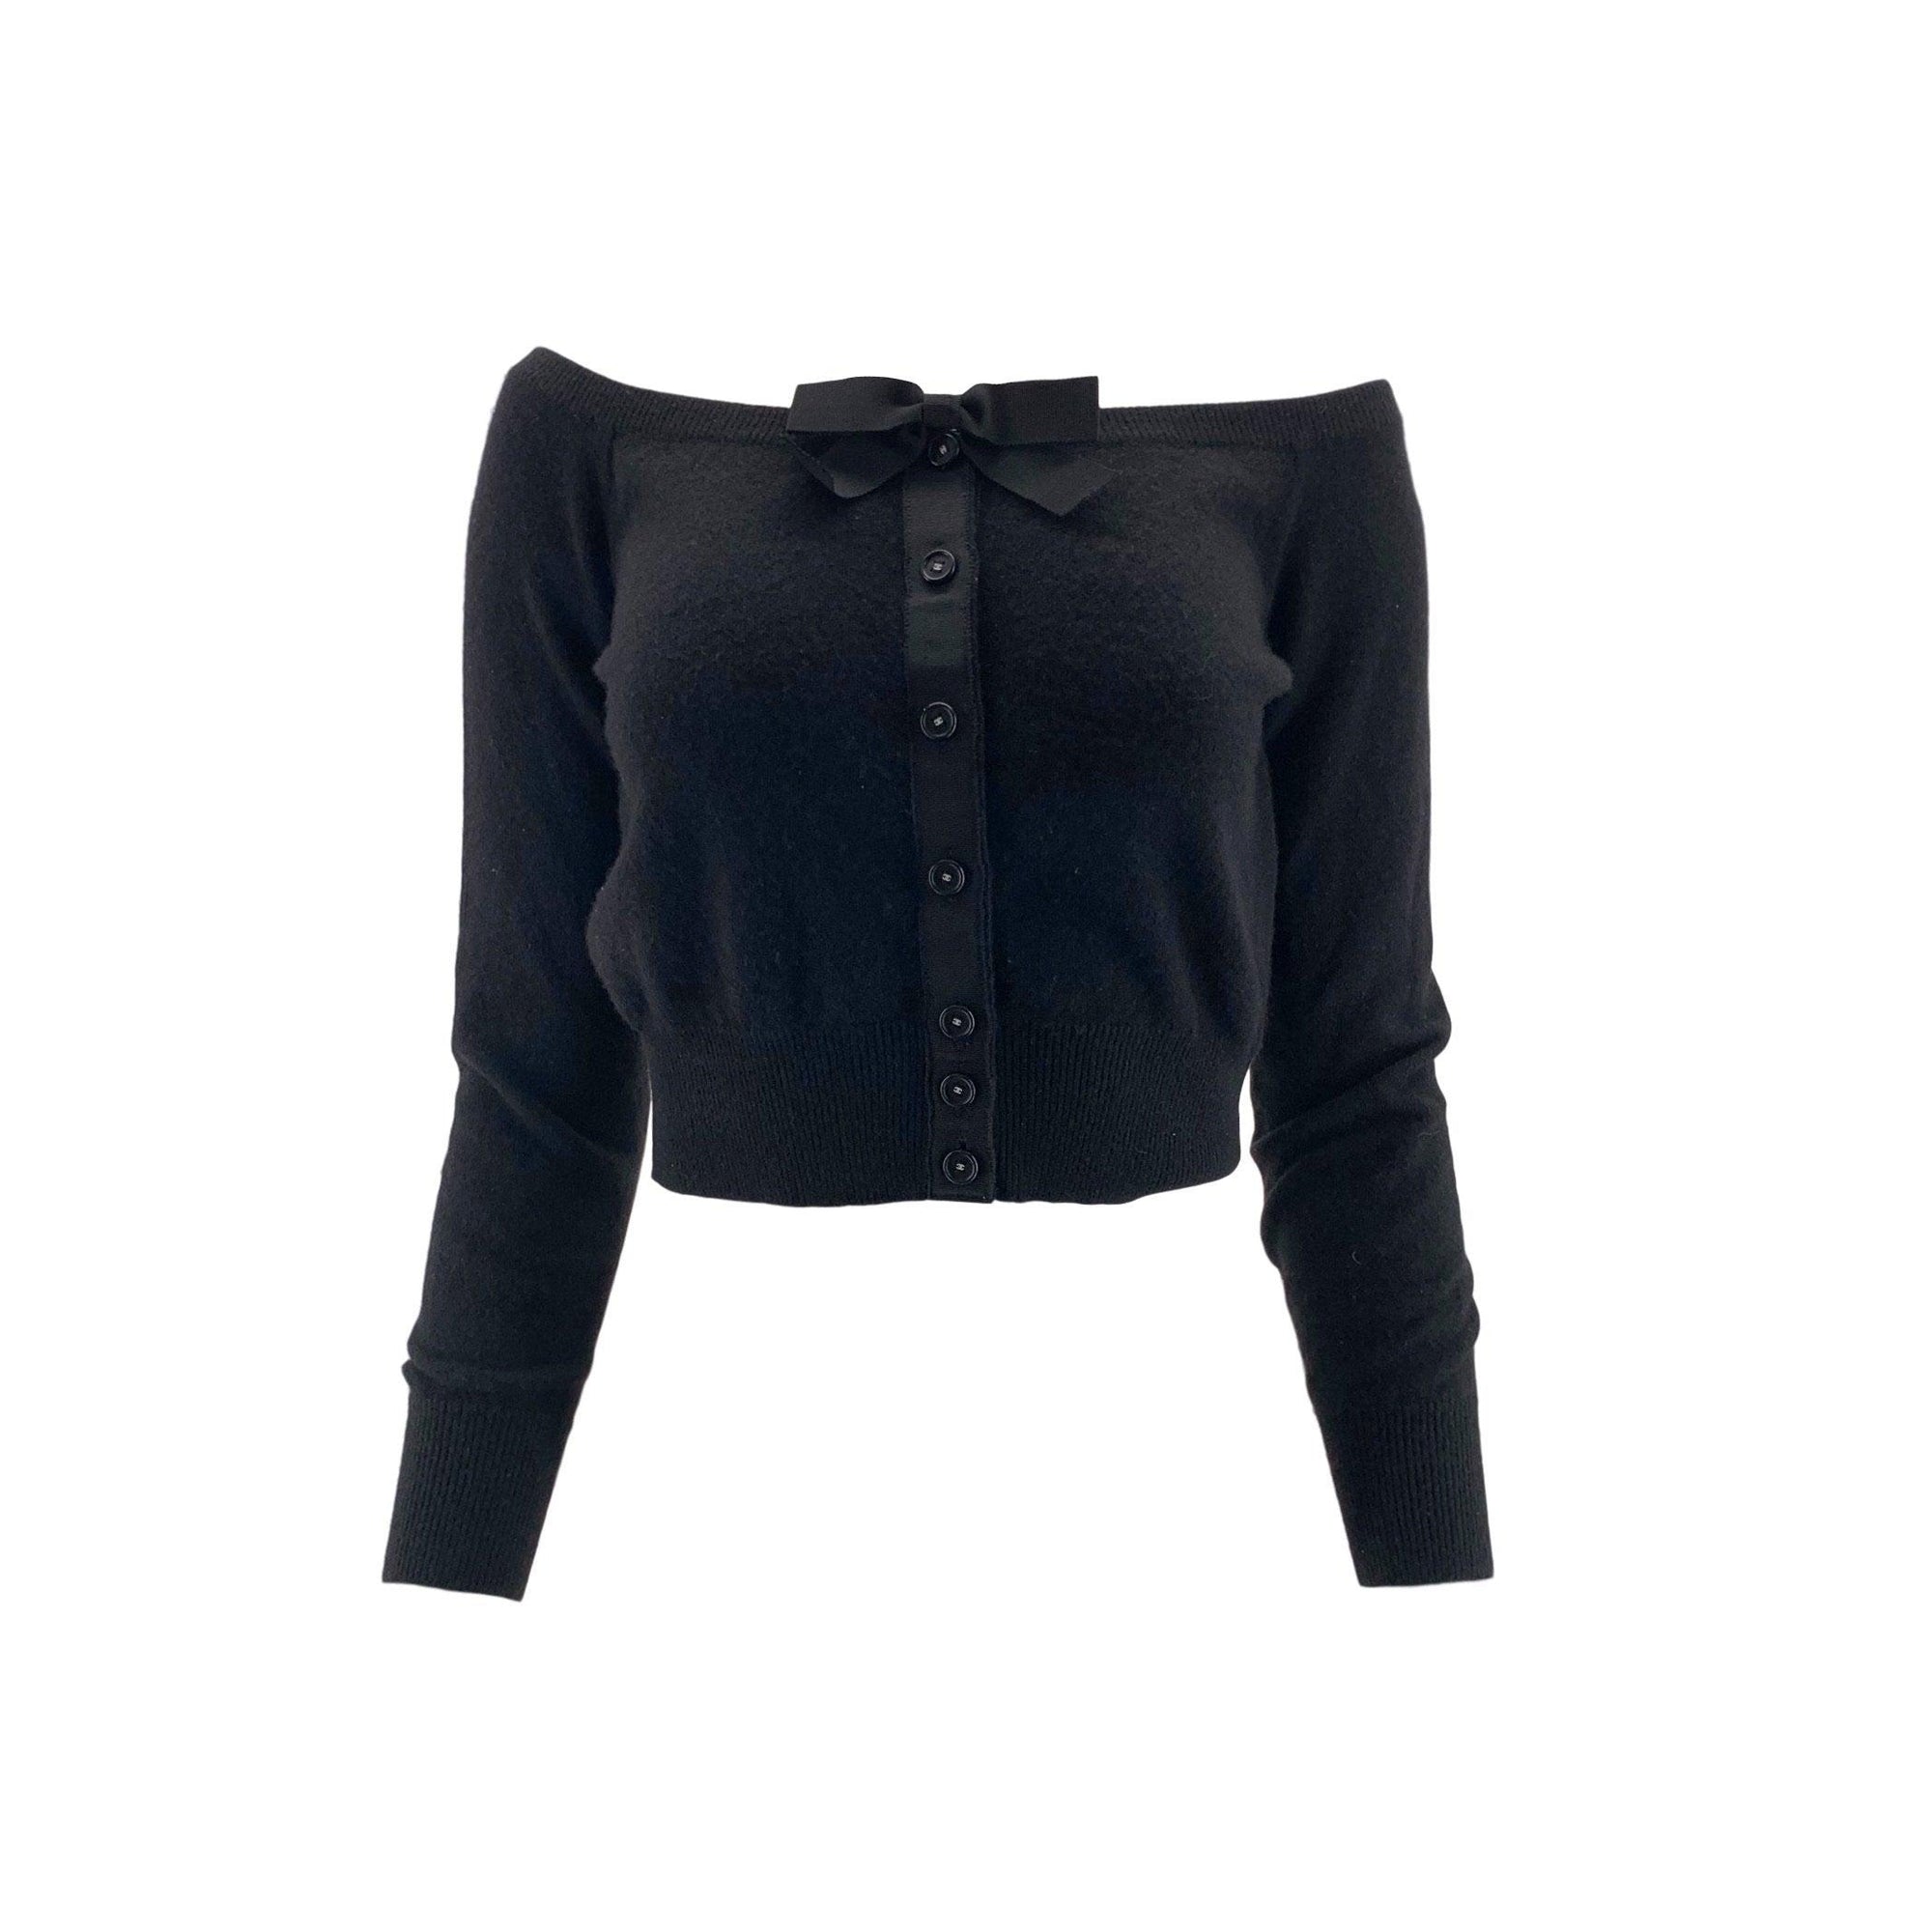 Chanel Black Cashmere Cropped Bow Top - Apparel